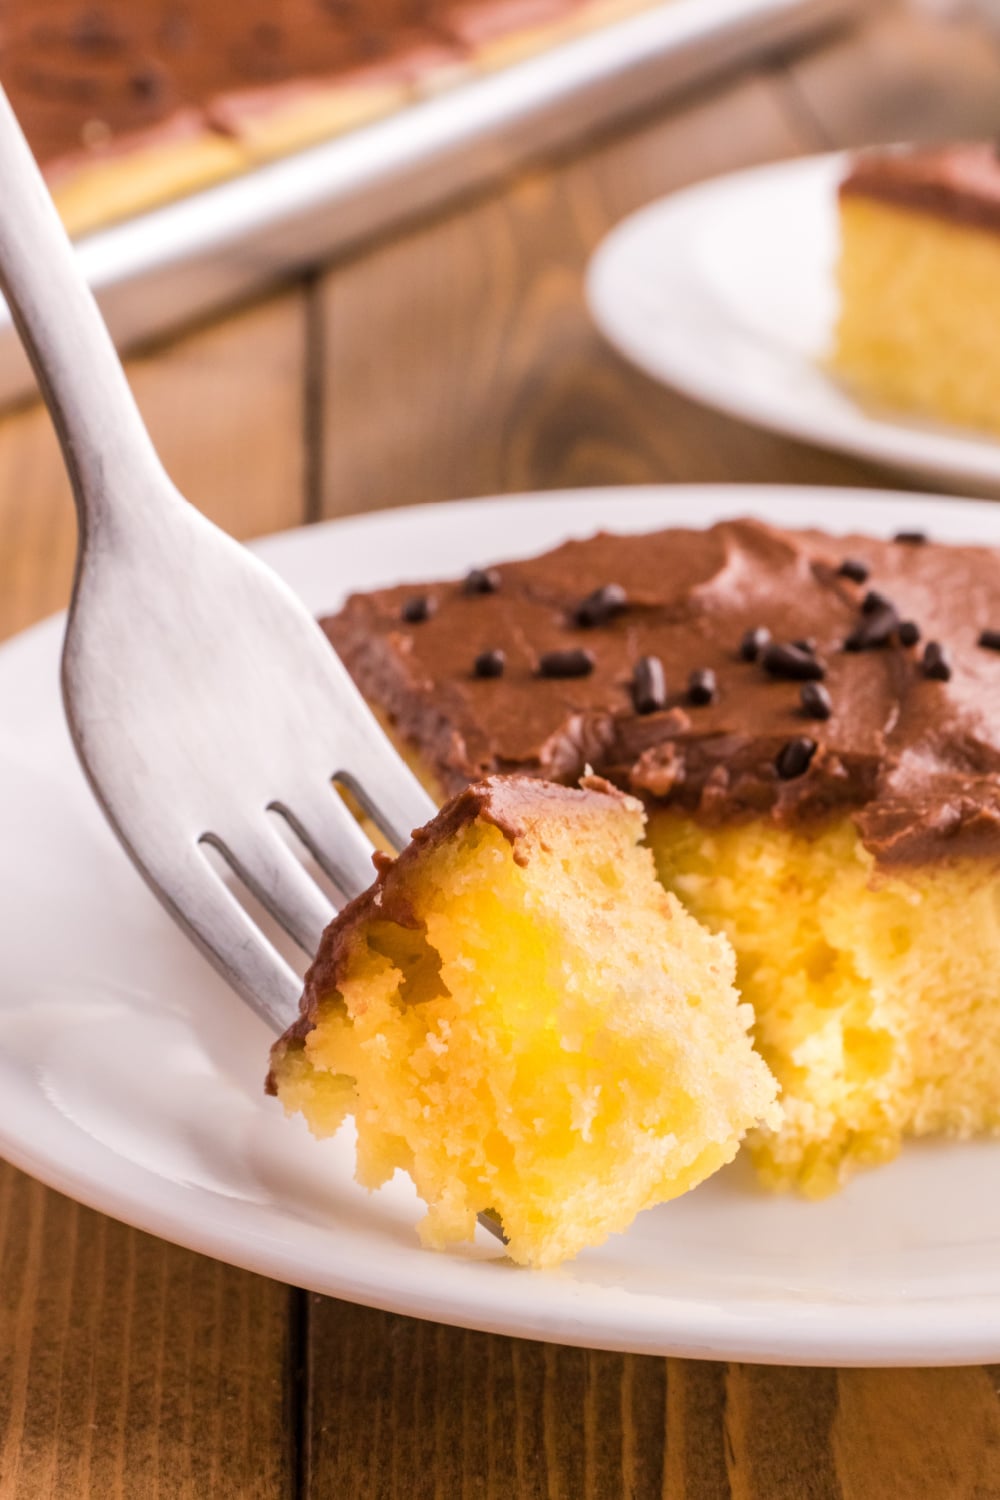 A single bite of Yellow Sheet Cake with Chocolate Frosting on a fork.